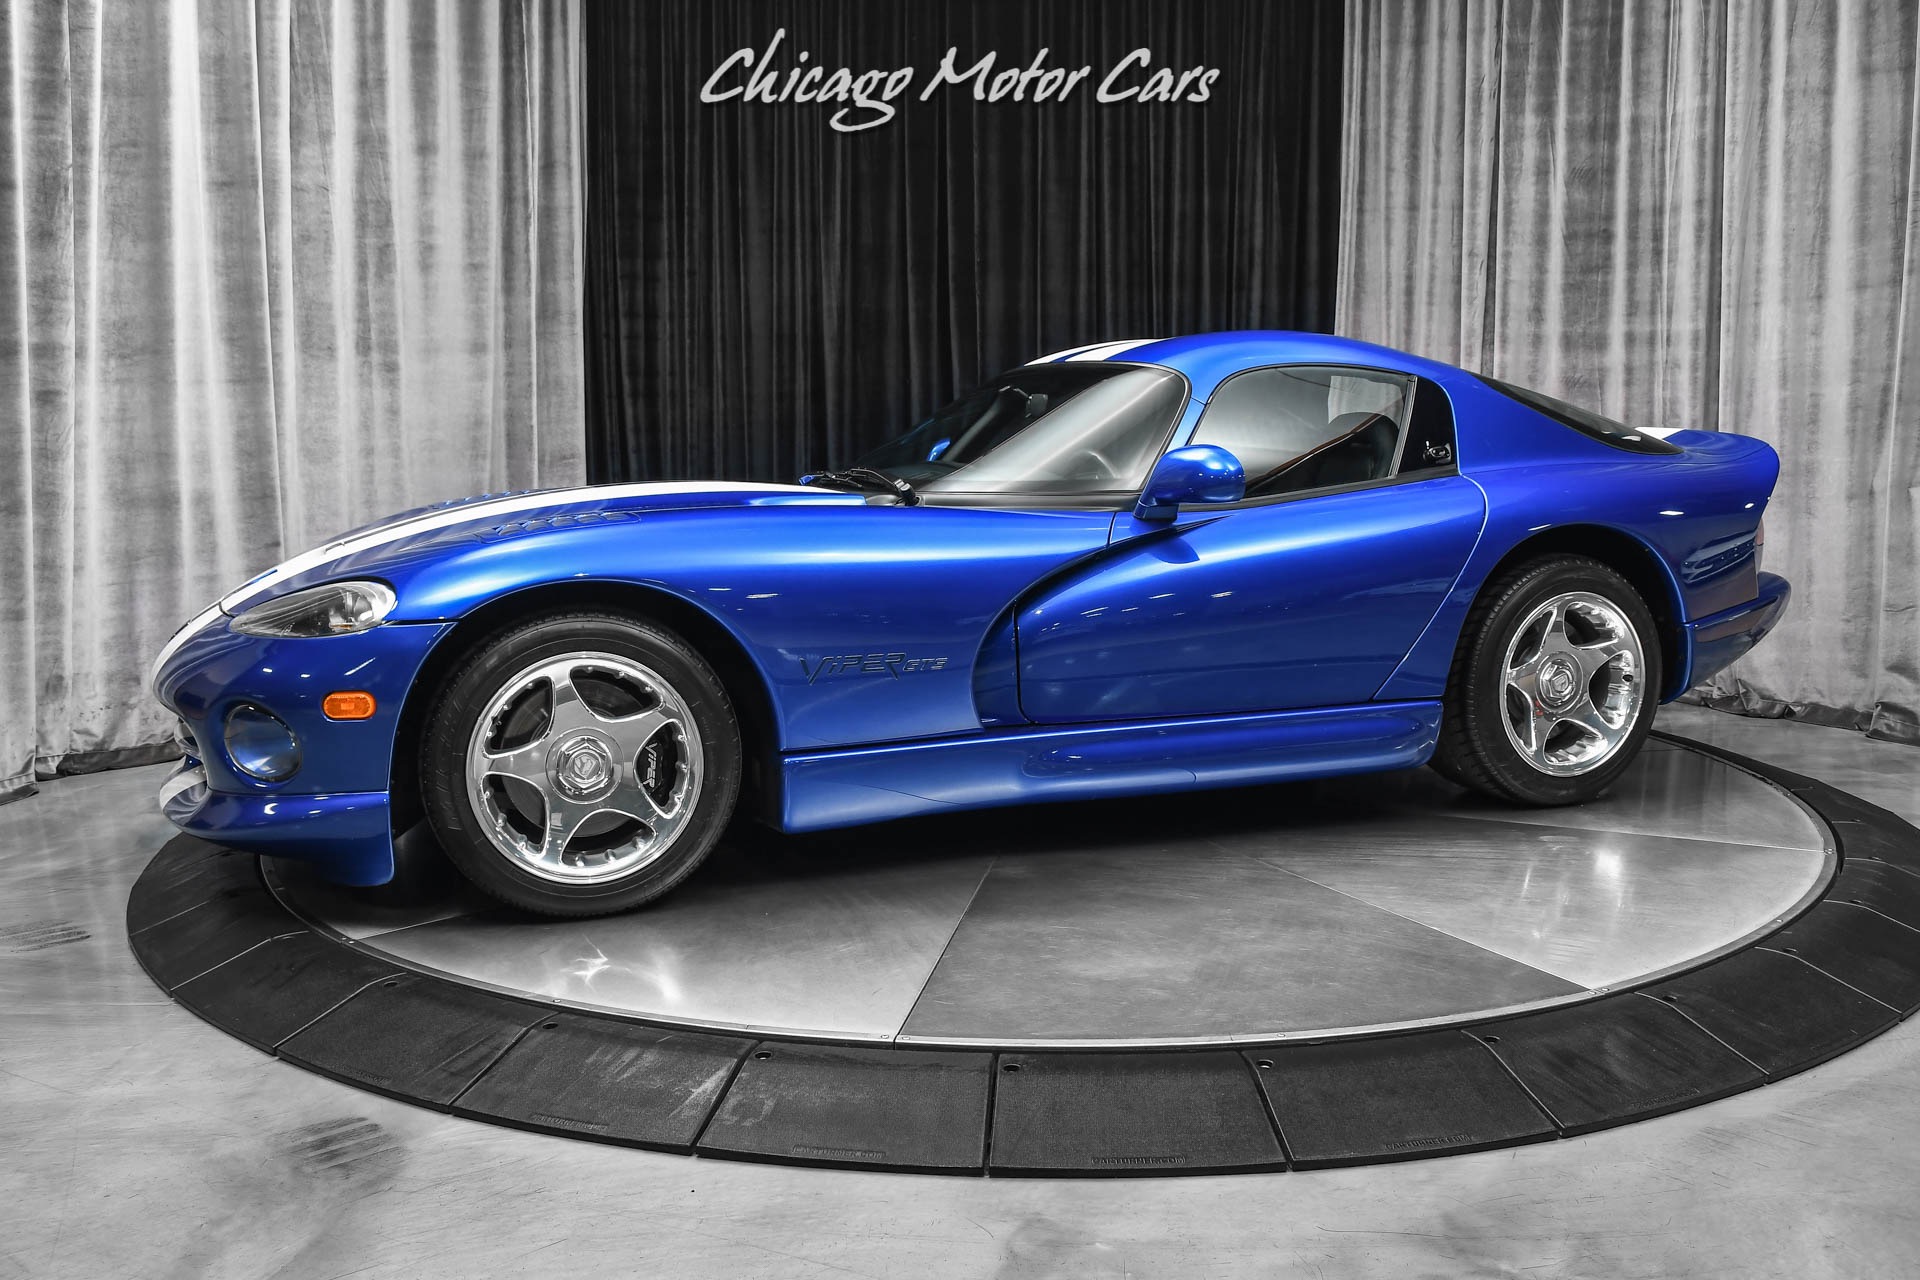 Used-1997-Dodge-Viper-GTS-Coupe-ONLY-2K-Miles-Viper-Blue-wStripes-Collector-Quality-Example